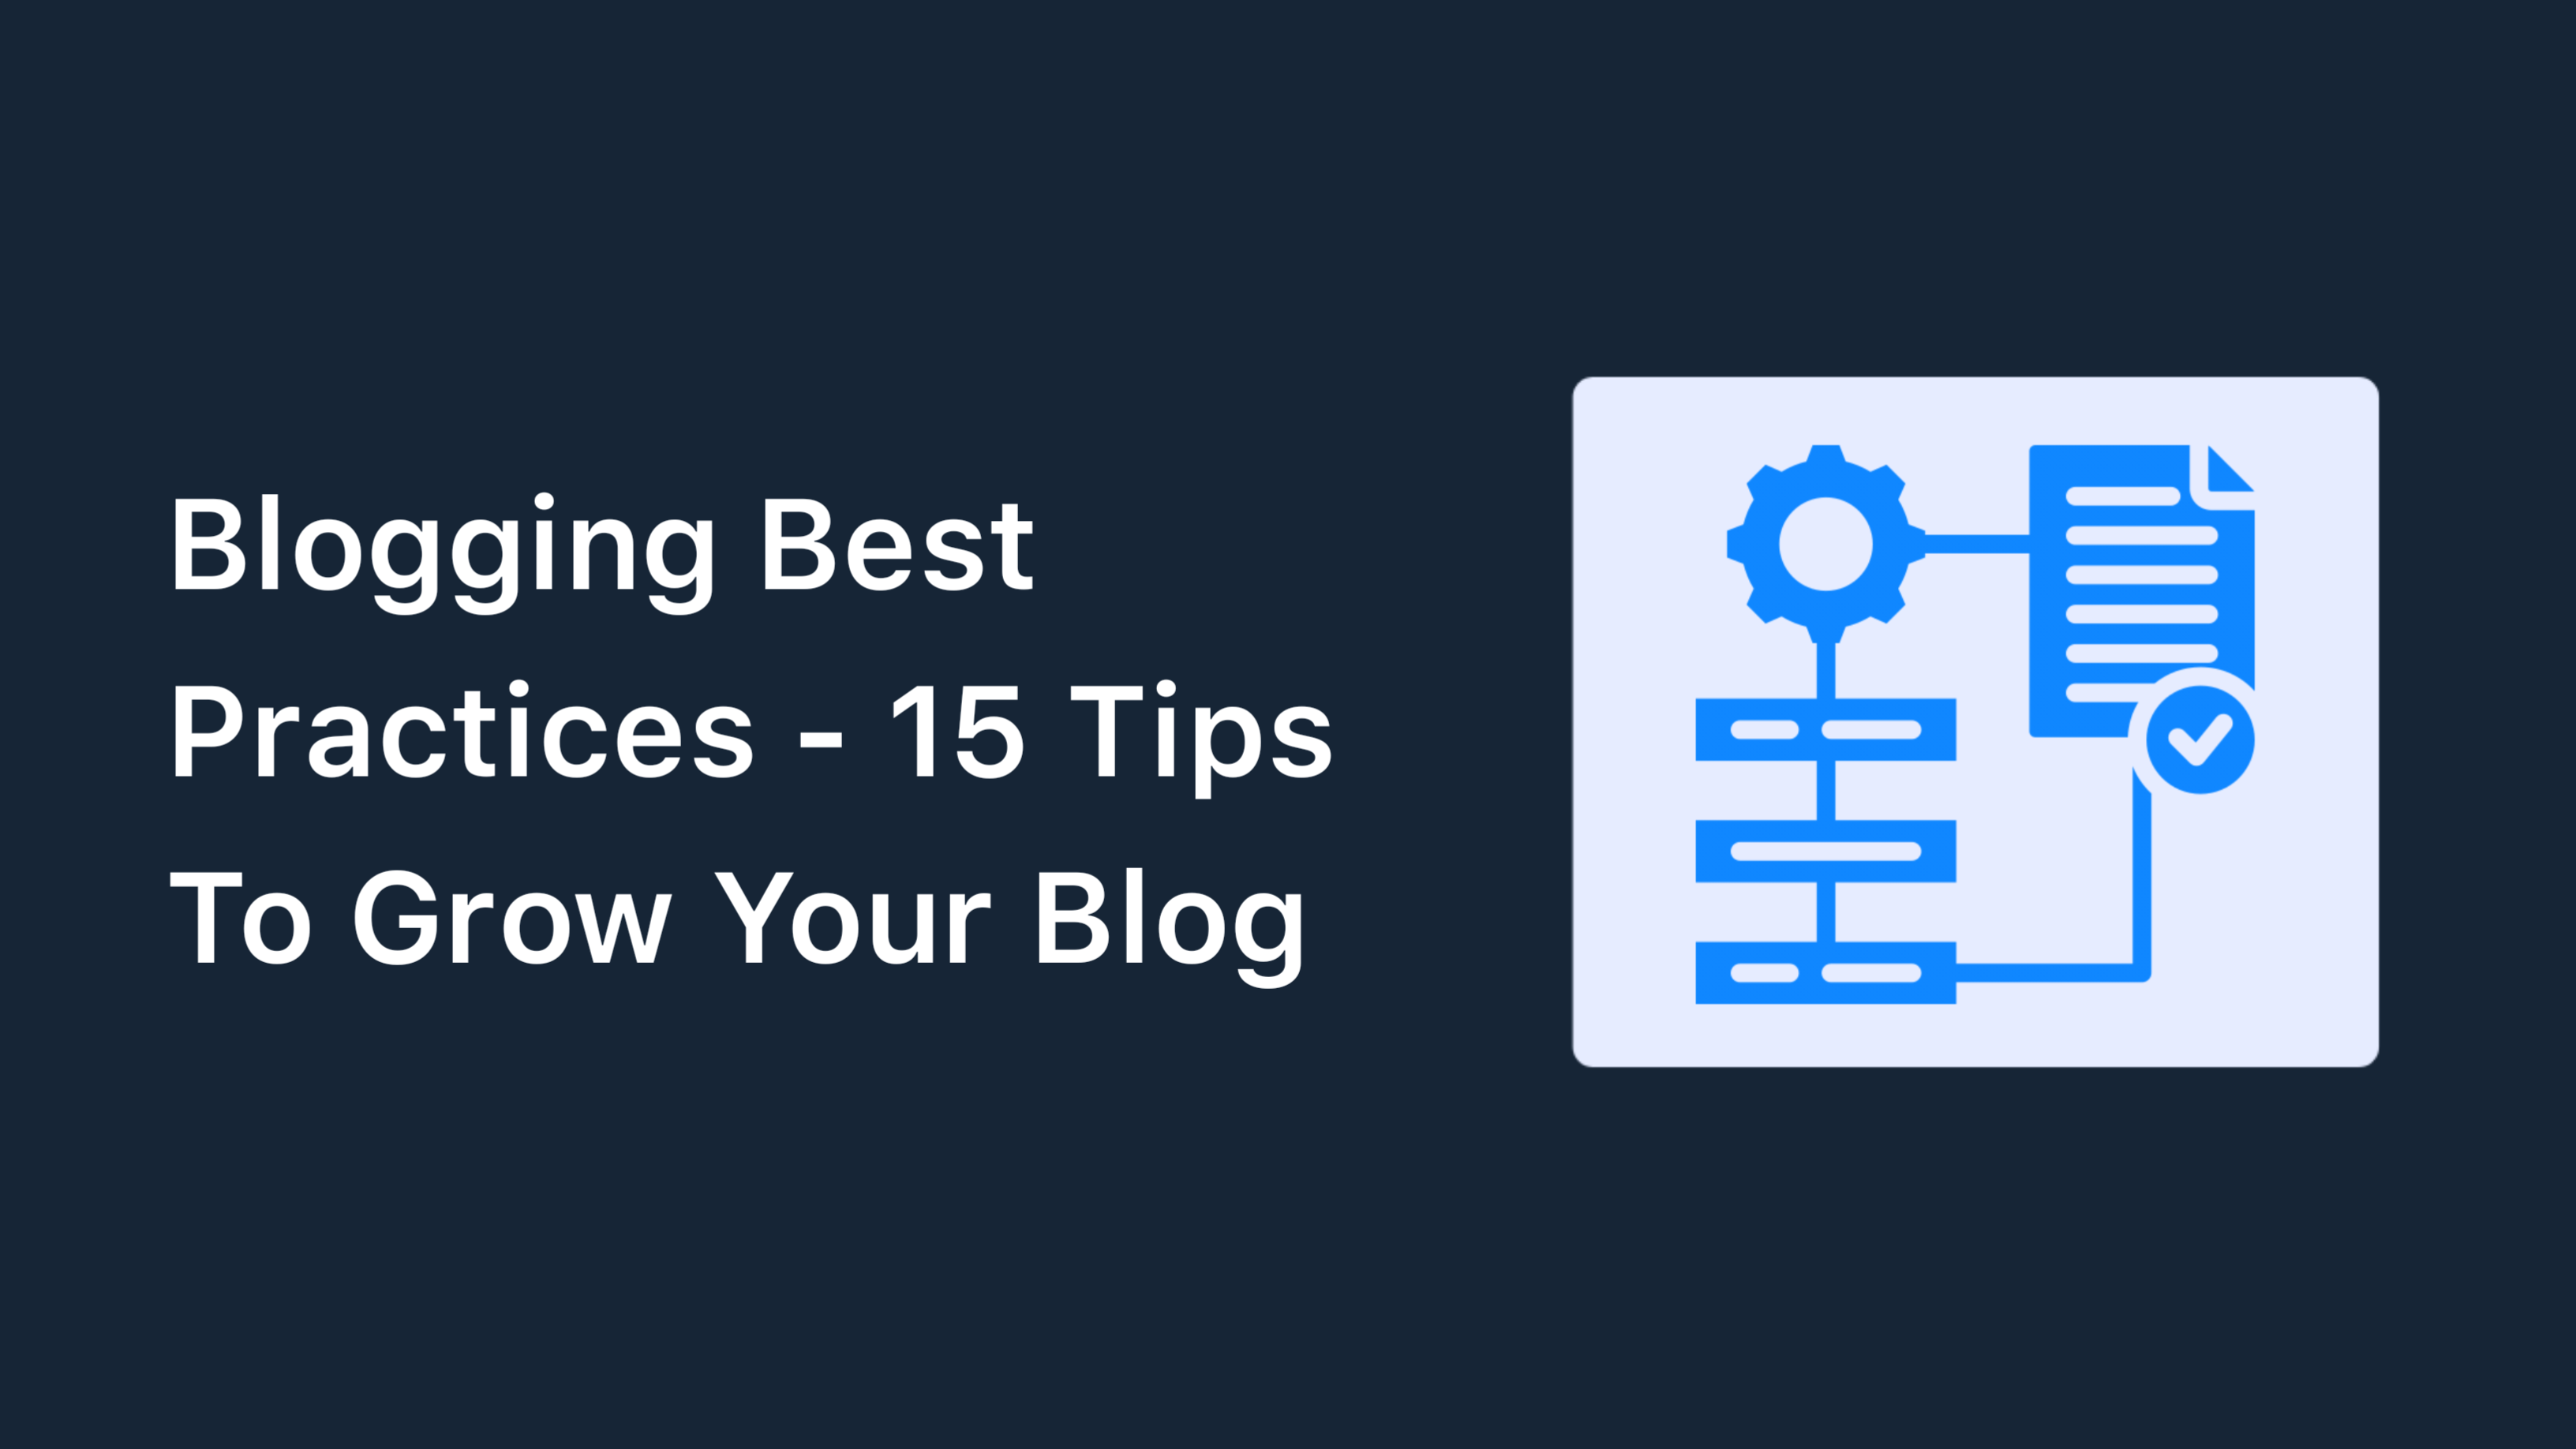 Blogging Best Practices - 15 Tips To Grow Your Blog